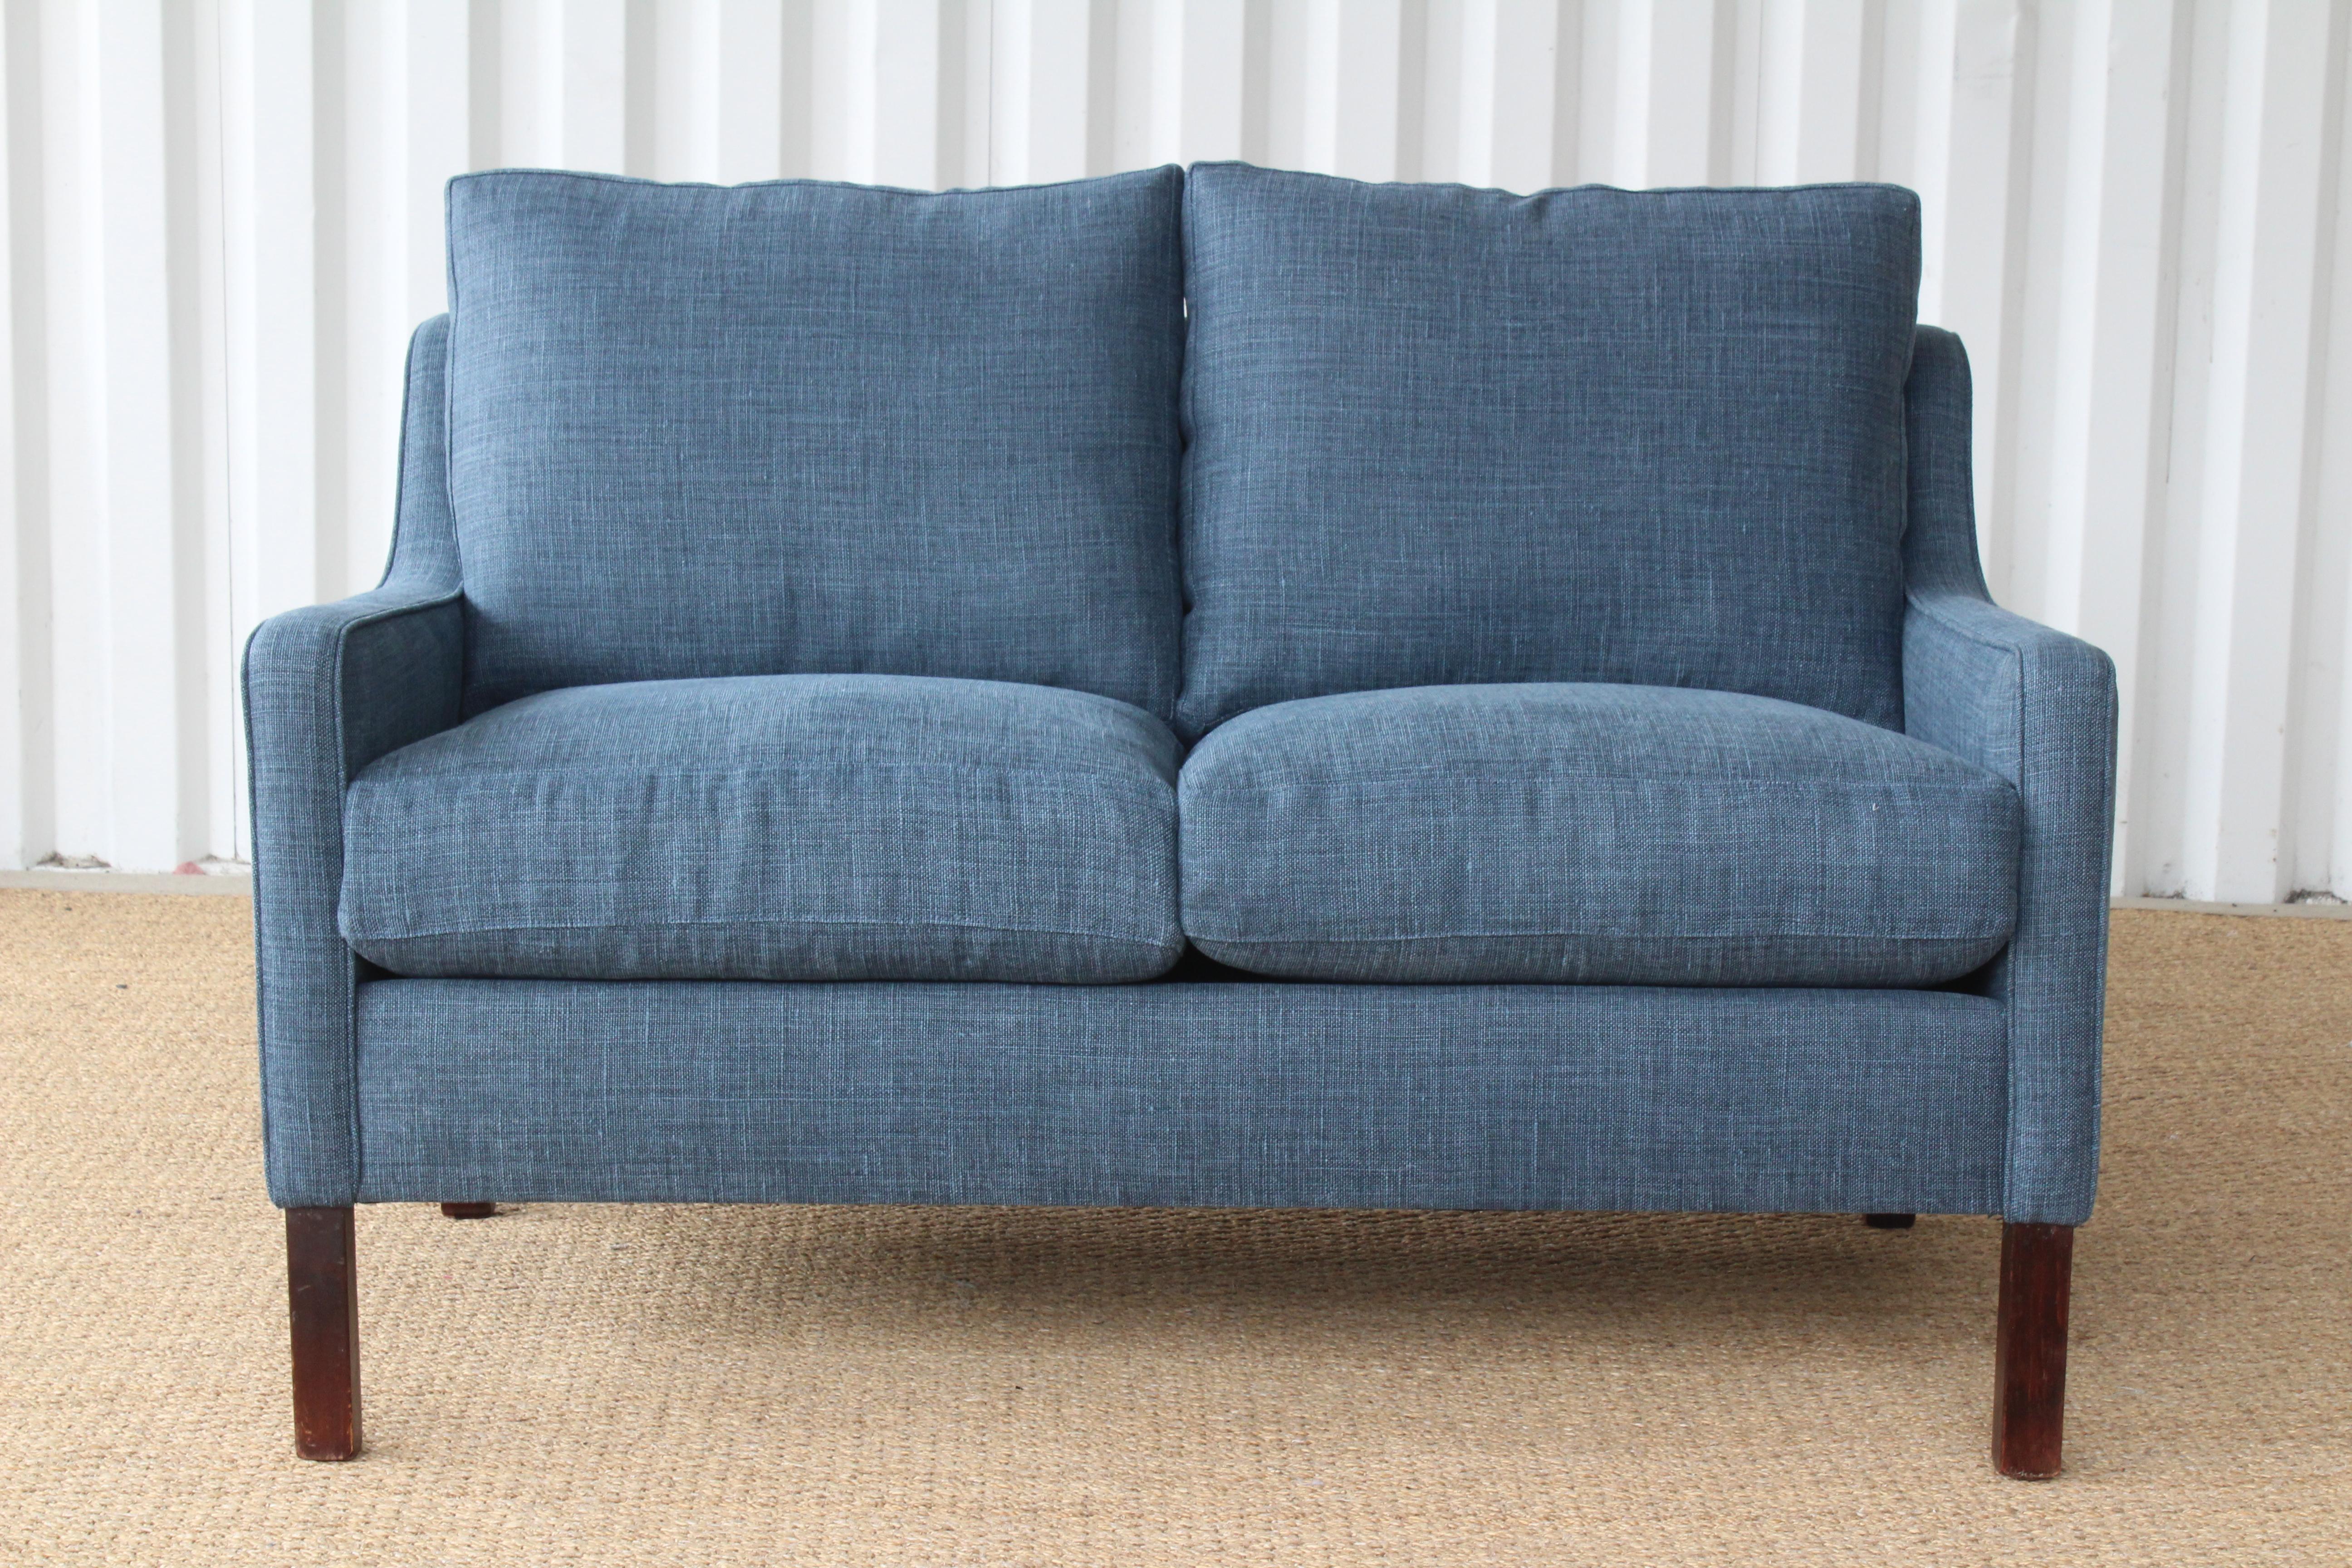 Vintage 1960s Danish modern settee in the style of Borge Mogensen. Newly upholstered in blue Belgian linen. The legs have been kept as is and show age appropriate patina.